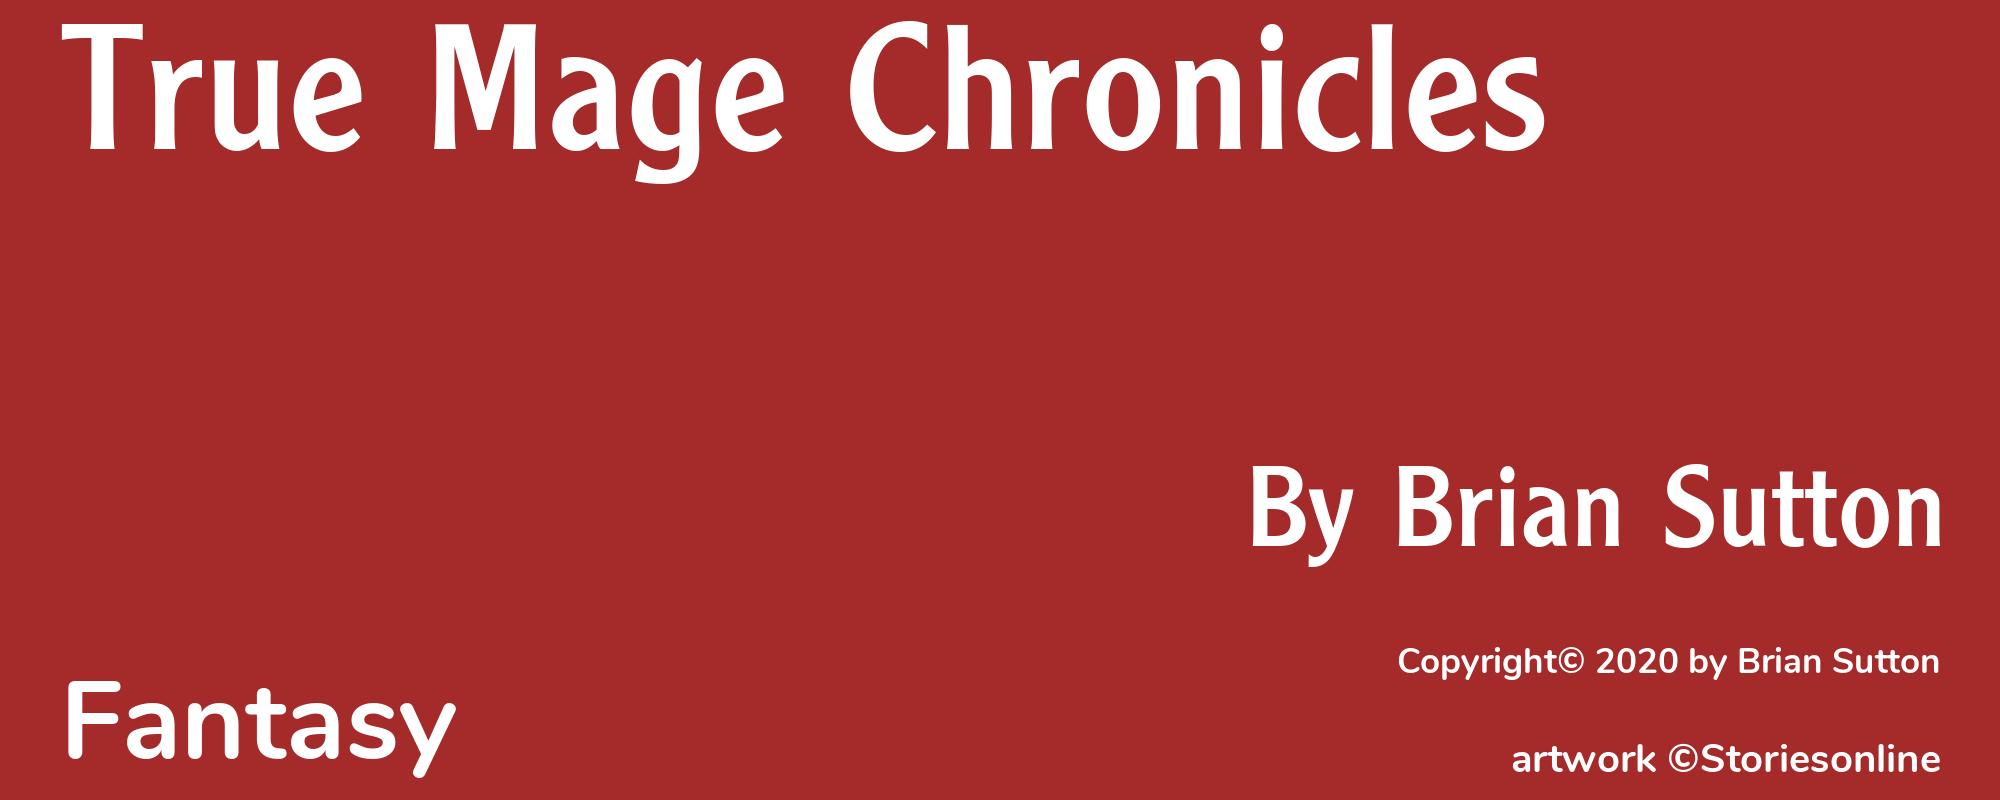 True Mage Chronicles - Cover